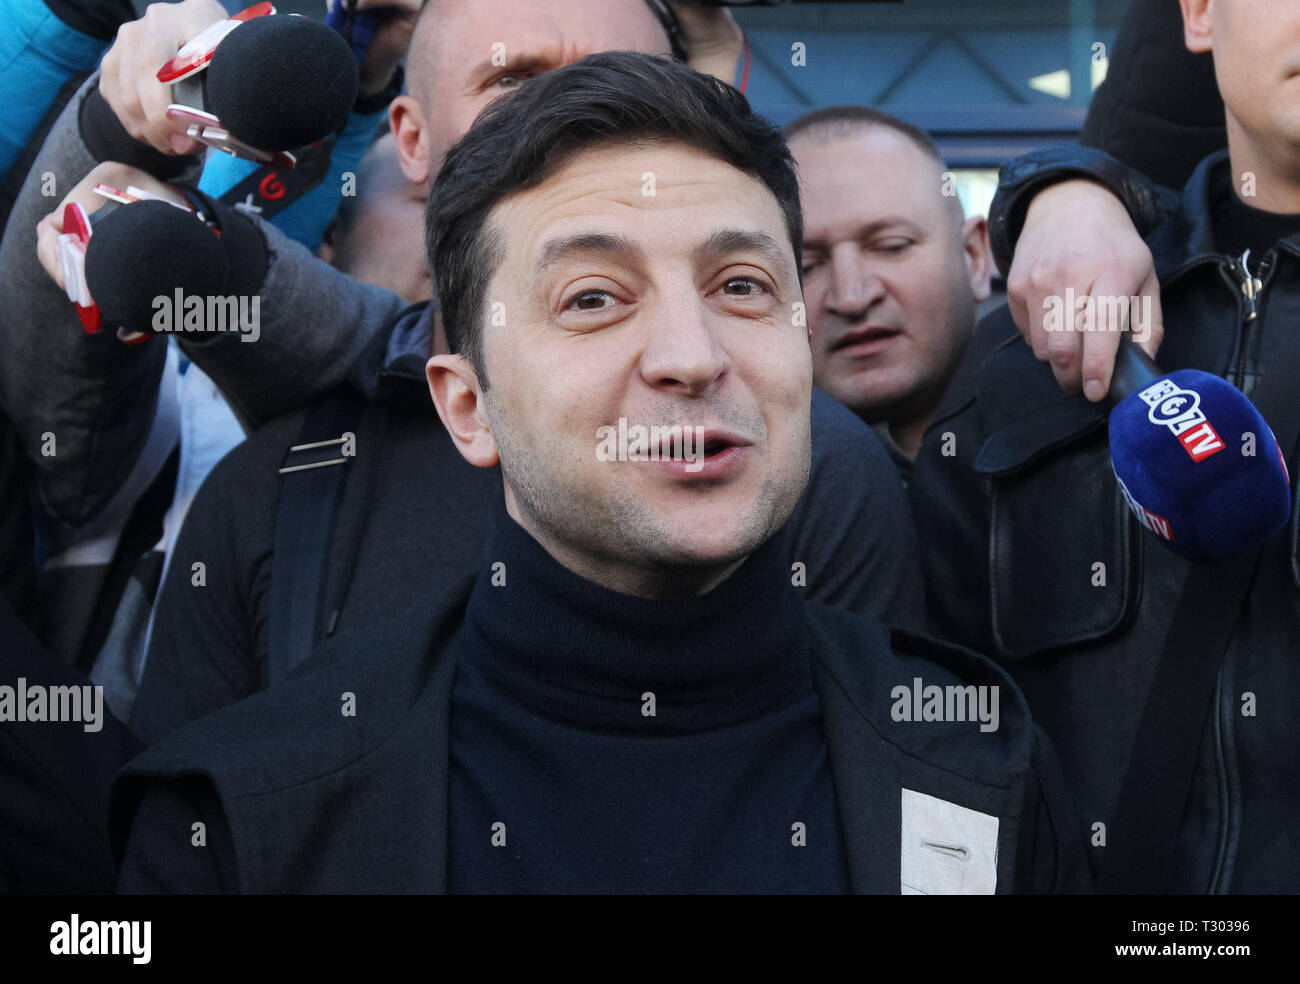 Ukrainian presidential candidate Volodymyr Zelensky seen talking to the media during his visit to the medical center for a test. On April 3, 2019 presidential candidate Volodymyr Zelenskiy declared his readiness to go to the debate before the second round of presidential elections with Ukrainian President and presidential candidate Petro Poroshenko, however, he voiced a number of conditions, in particular, the debate should be held at the Olympiyskiy stadium in Kiev, and candidates must pass a test for alcohol and drugs. Ukrainian President Petro Poroshenko agreed to these terms. Stock Photo